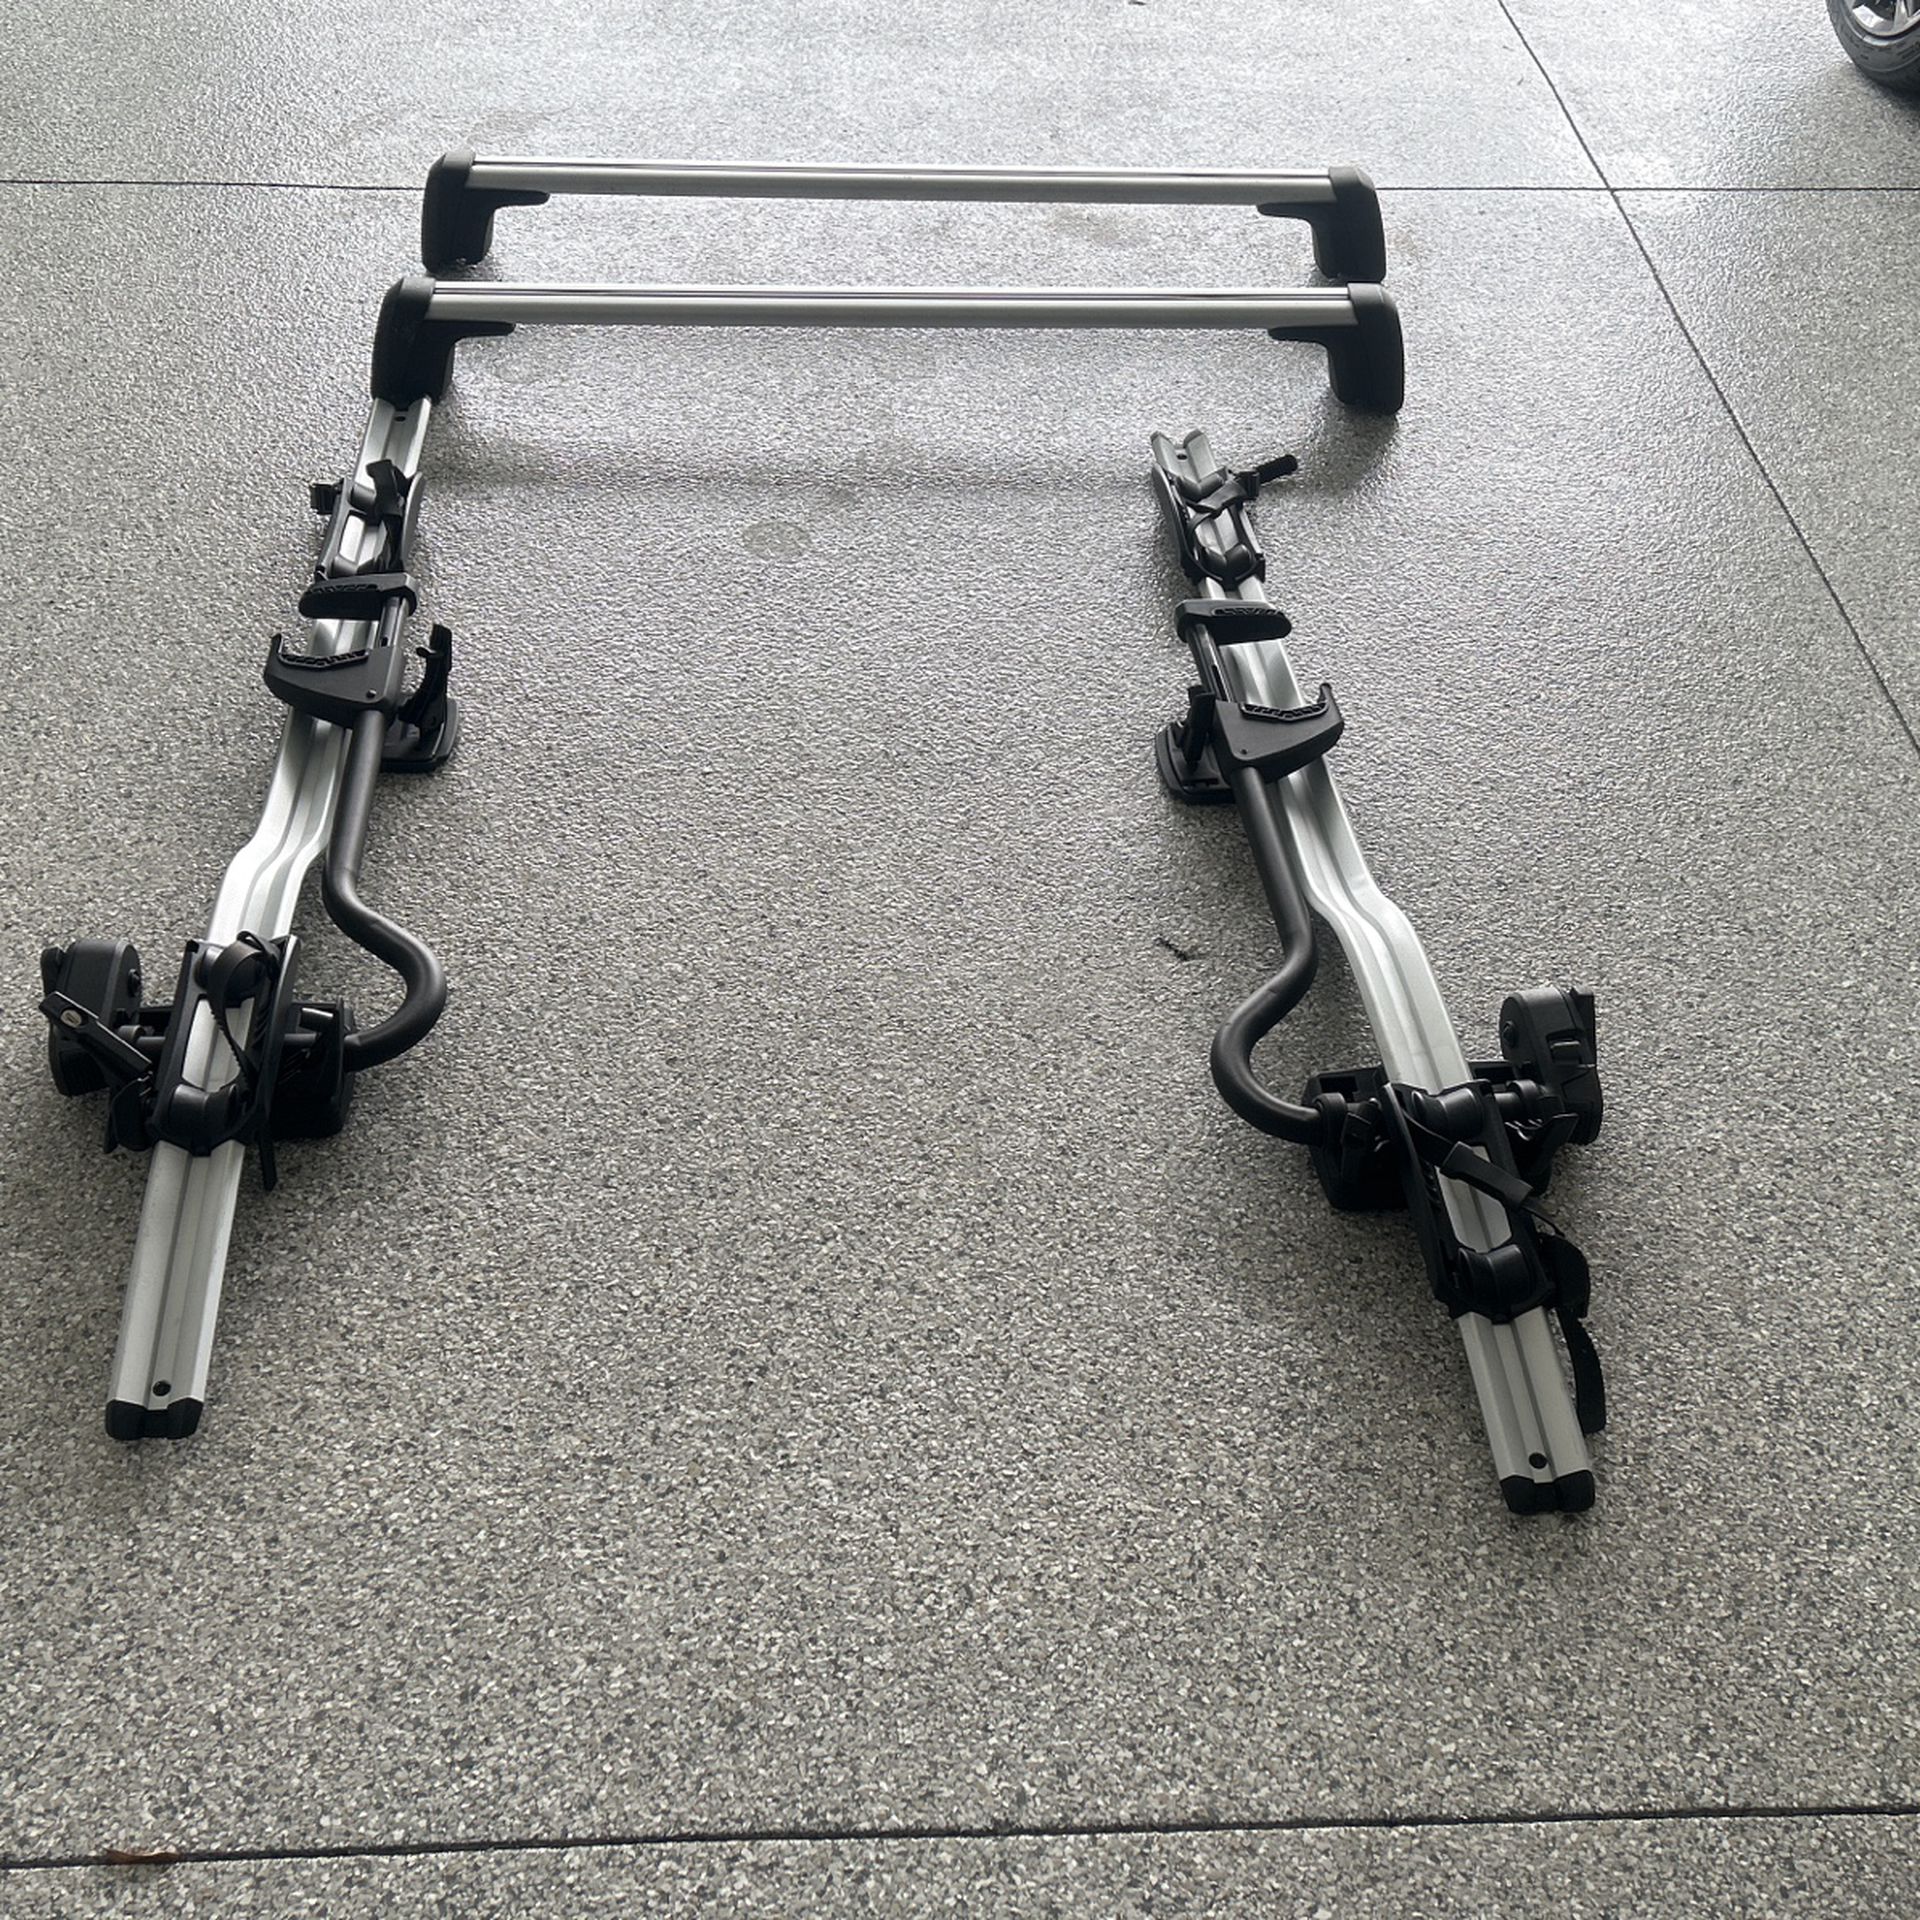 BMW Roof Rack and Bike Carriers